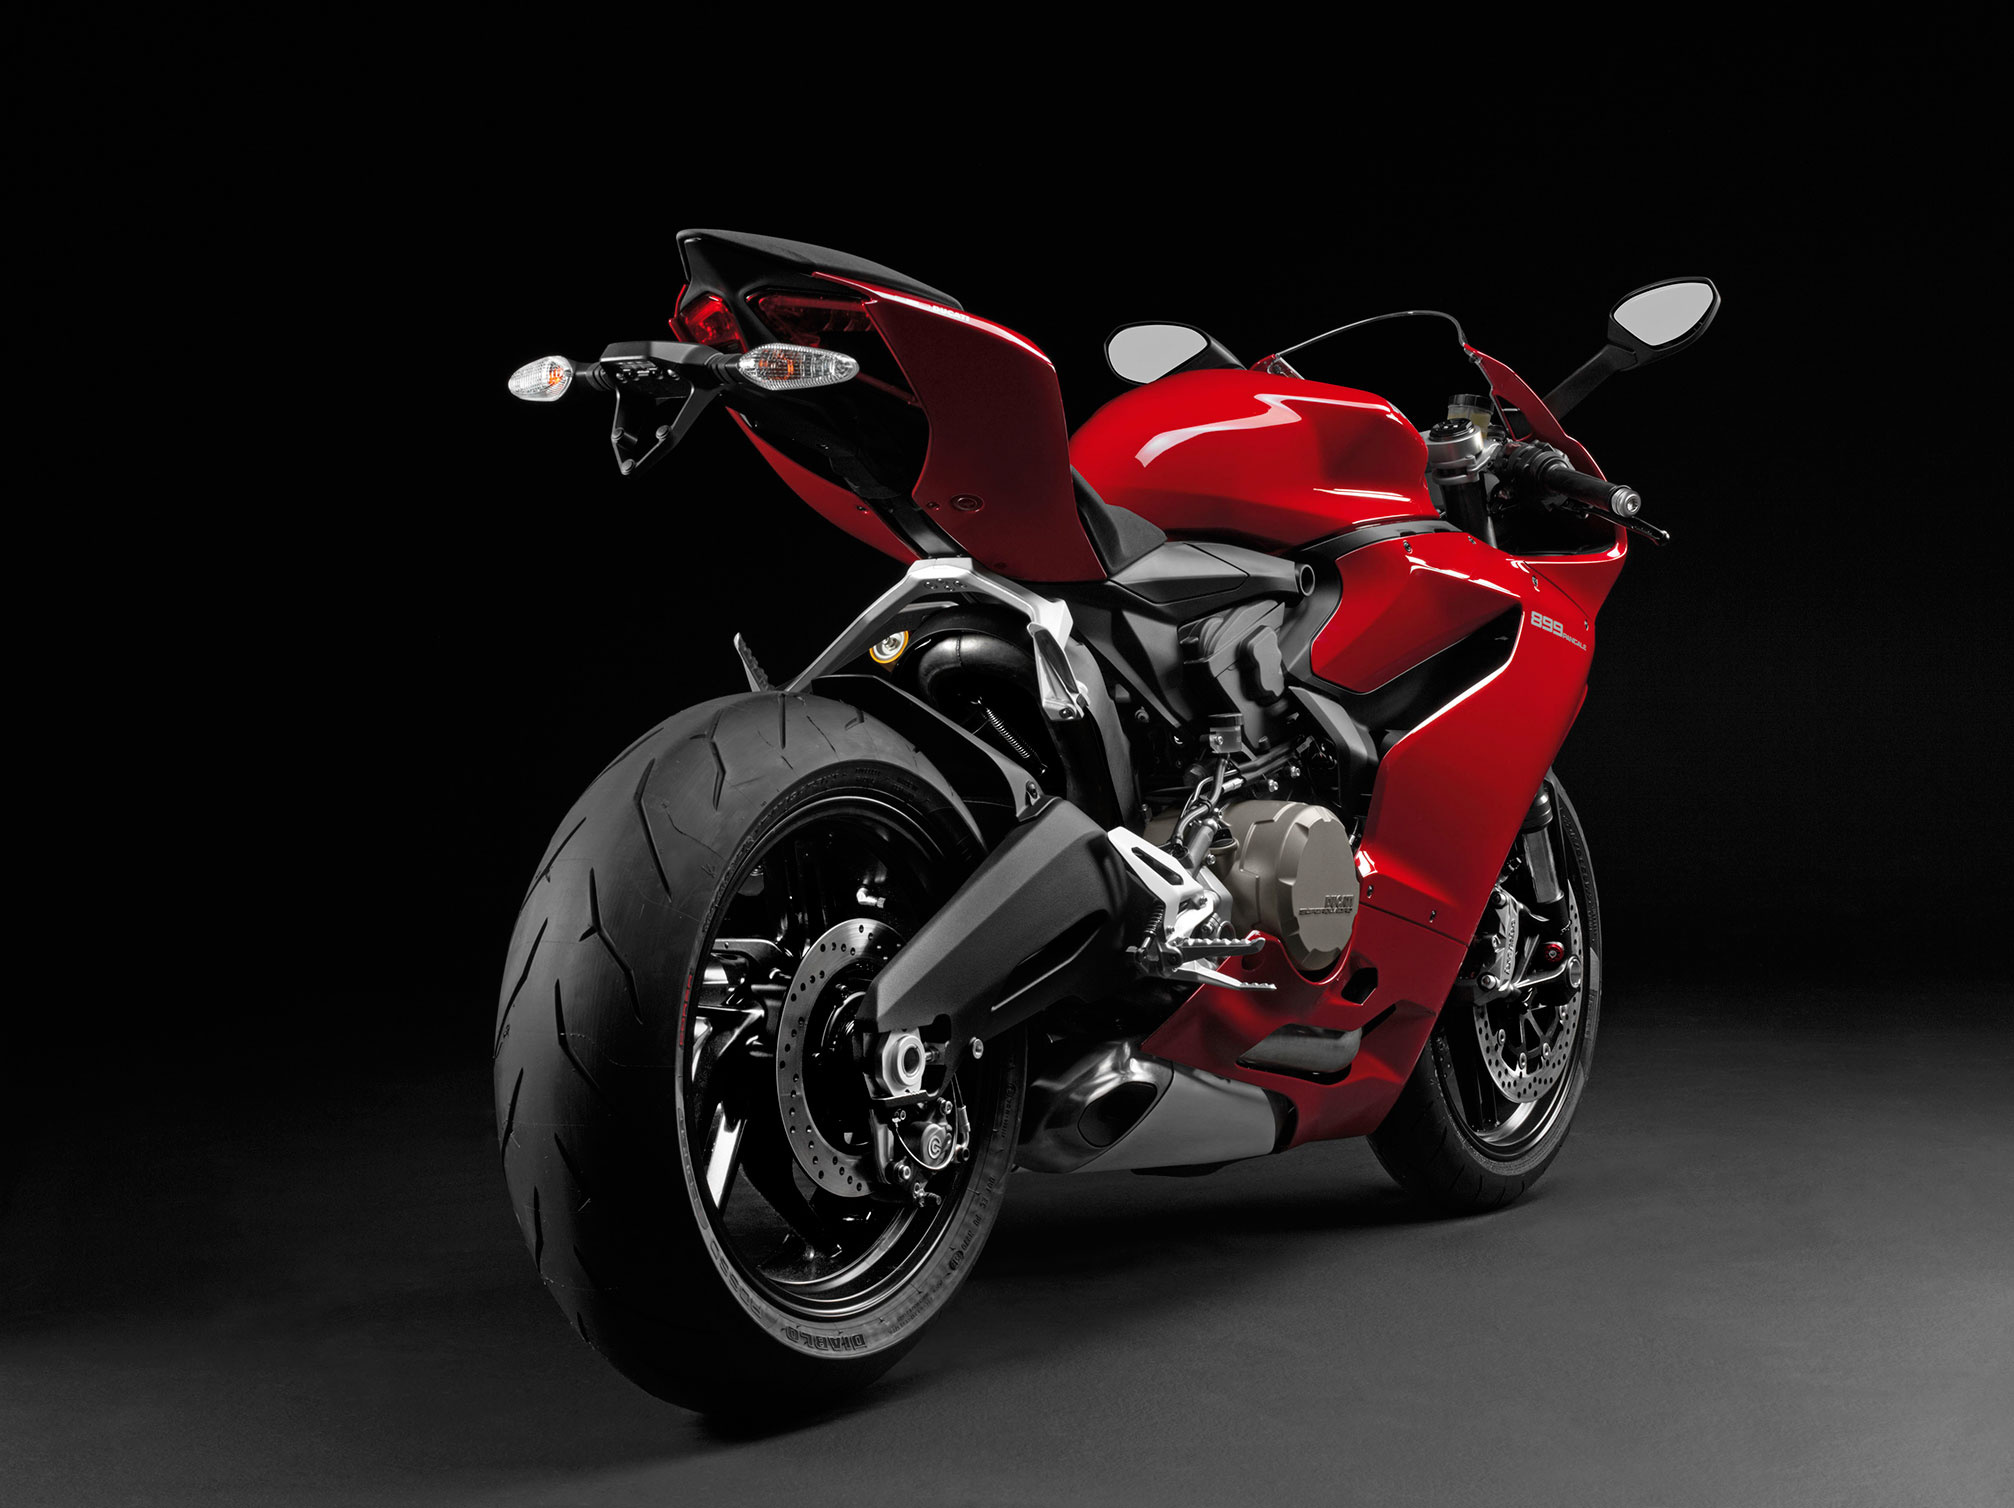 Superbike: Ducati 899 Panigale, A racing motorcycle equipped with a 148-horsepower engine. 2020x1510 HD Wallpaper.